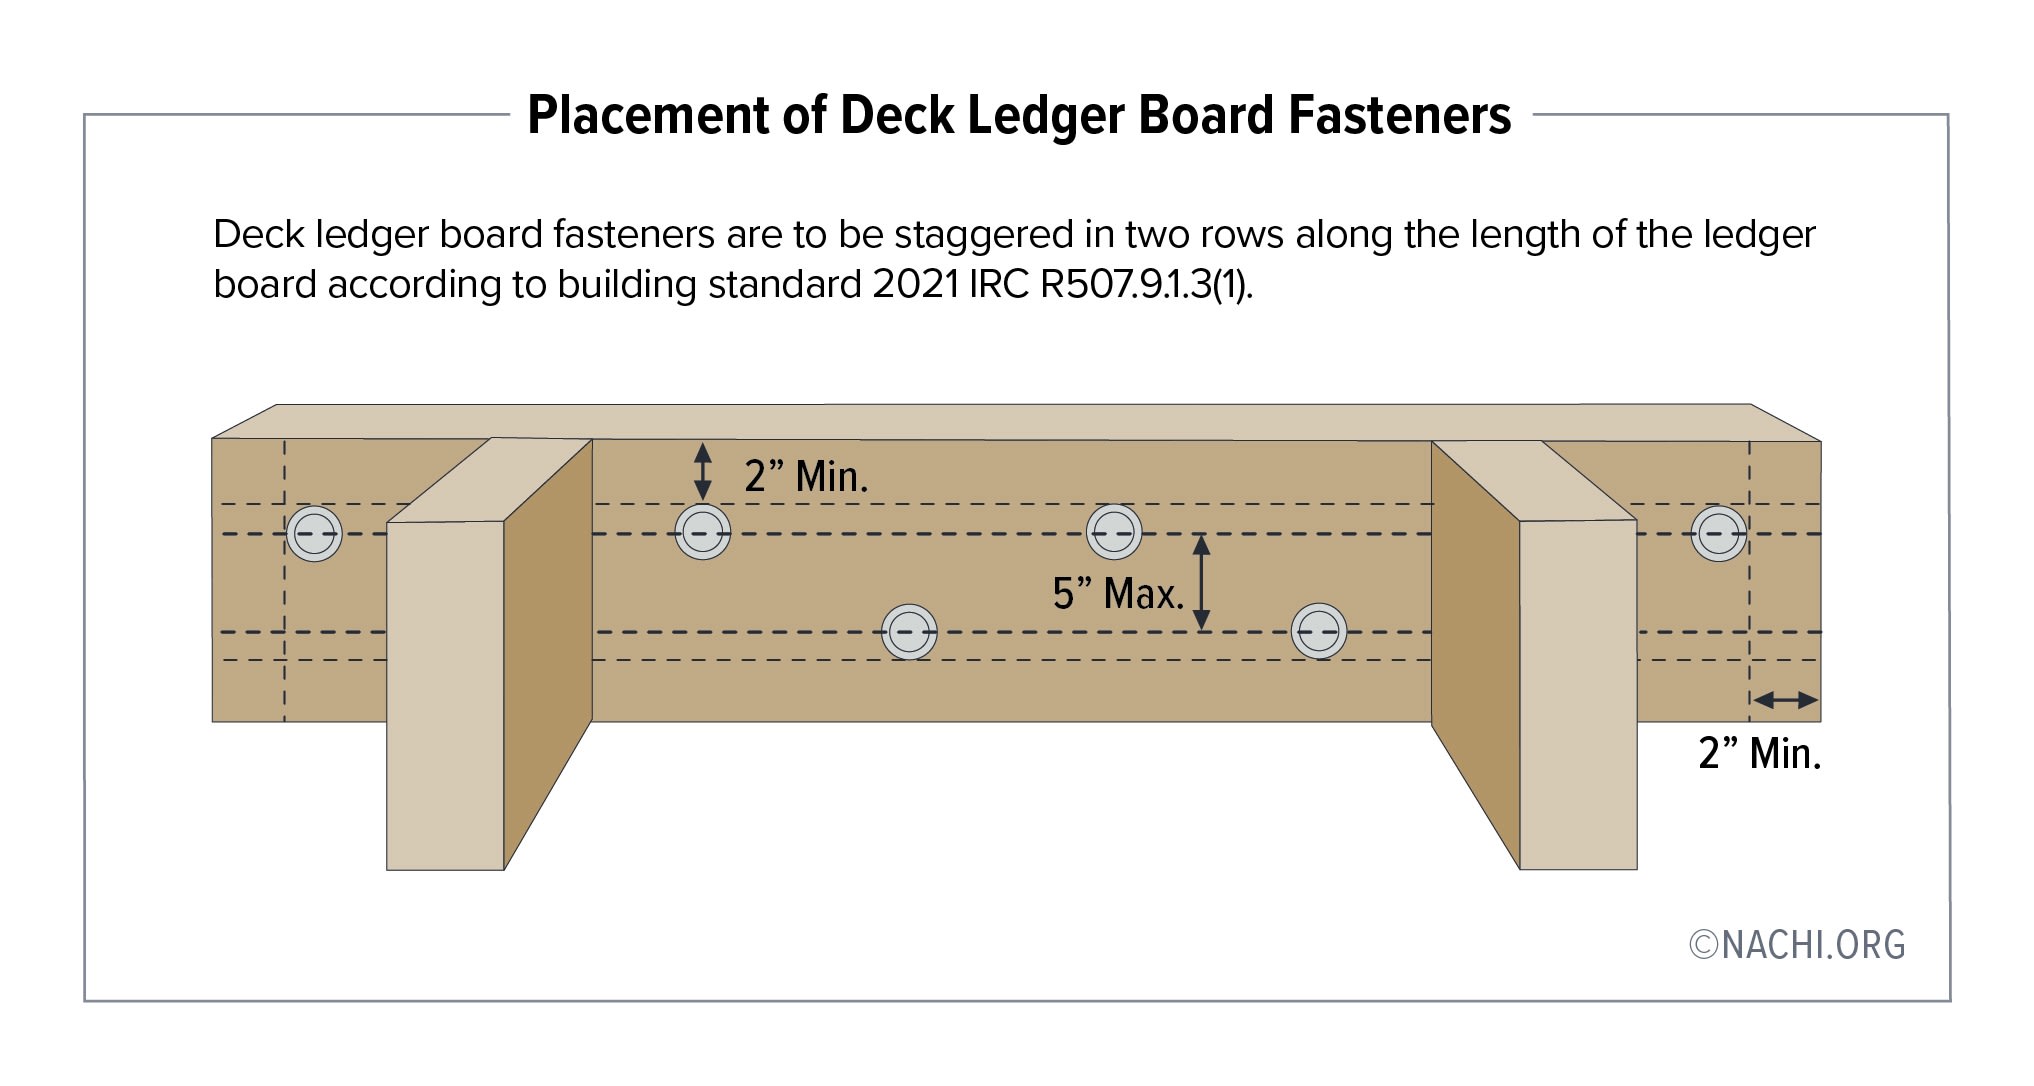 Deck ledger board fasteners are to be staggered in two rows along the length of the ledger board according to building standard IRC R507.9.1(1).